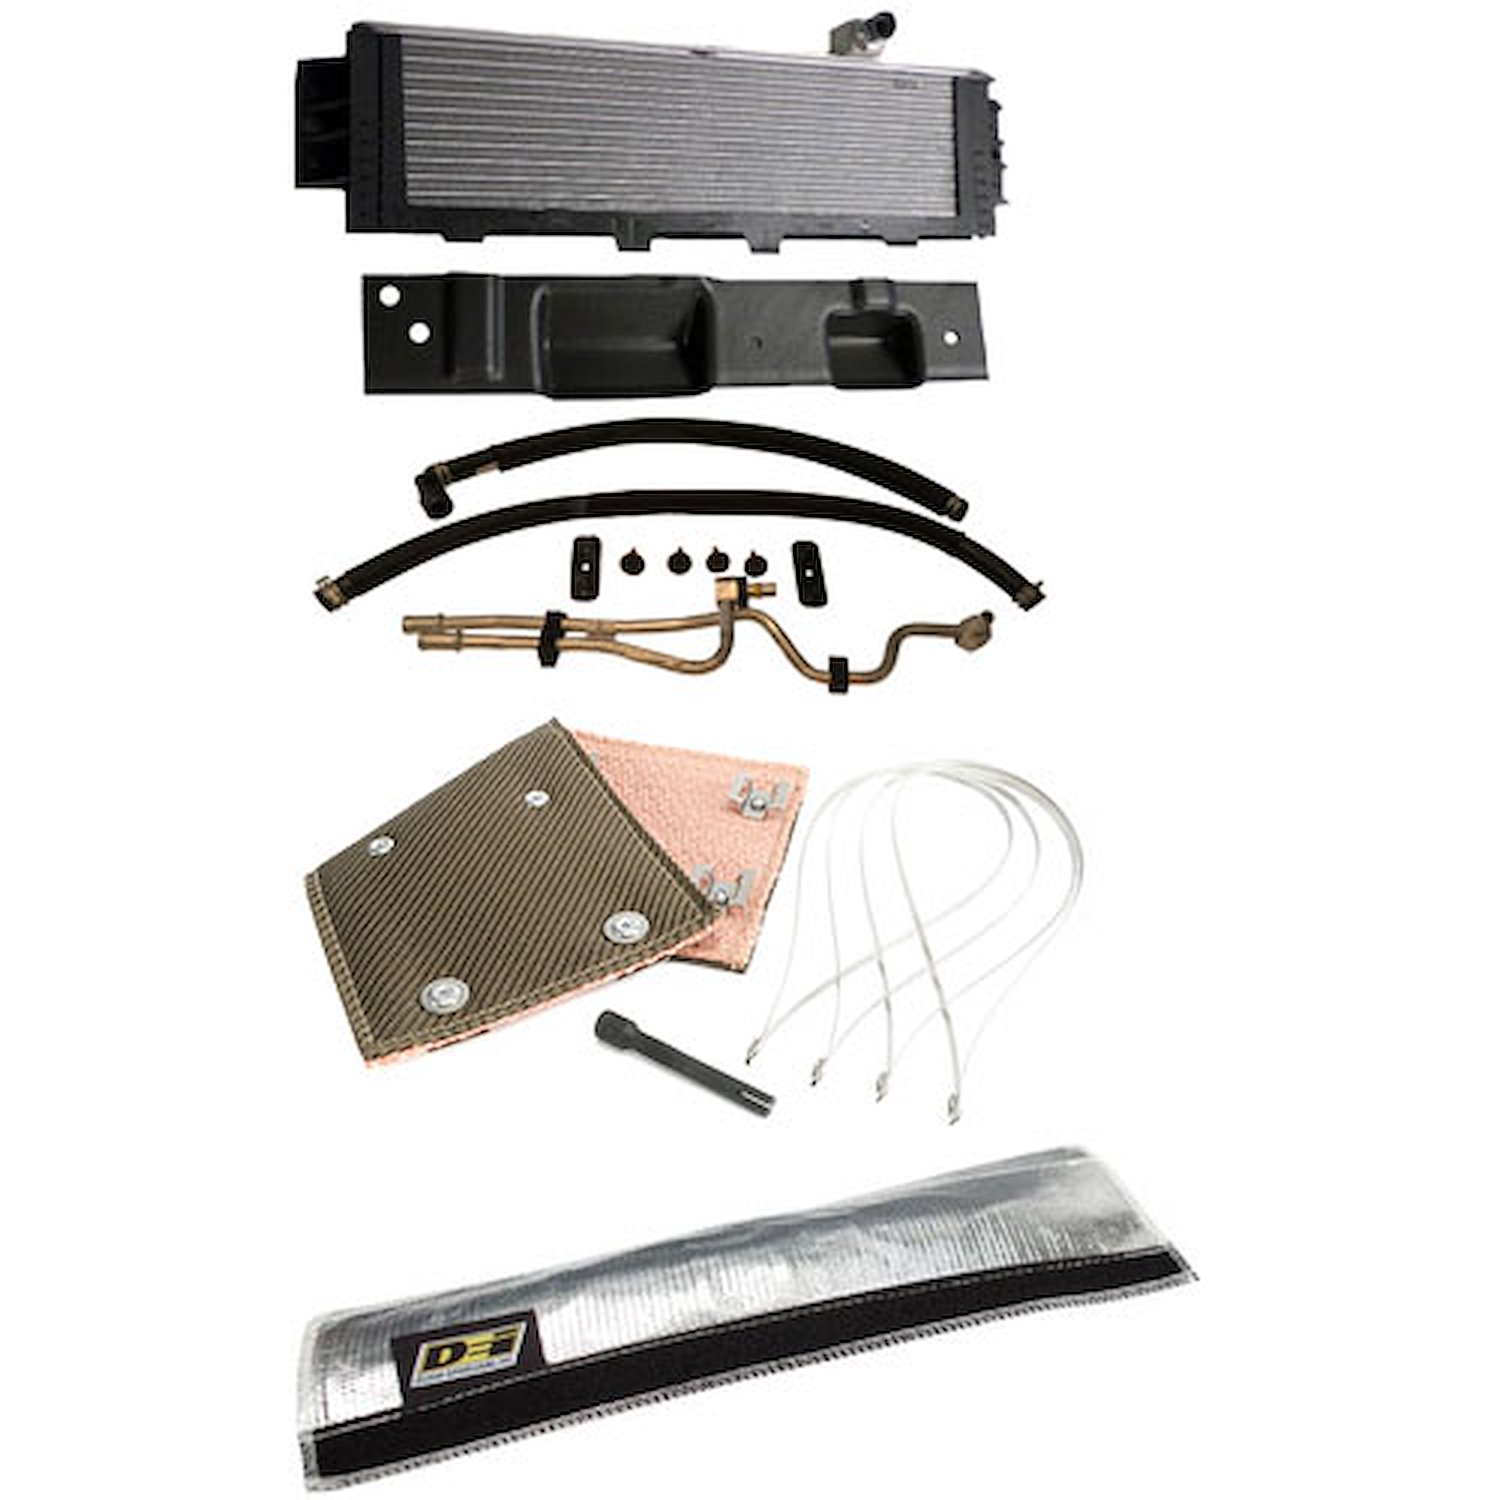 Auxiliary Cooling Kit 2014-Up C7 Corvette w/Manual Transmission Includes: